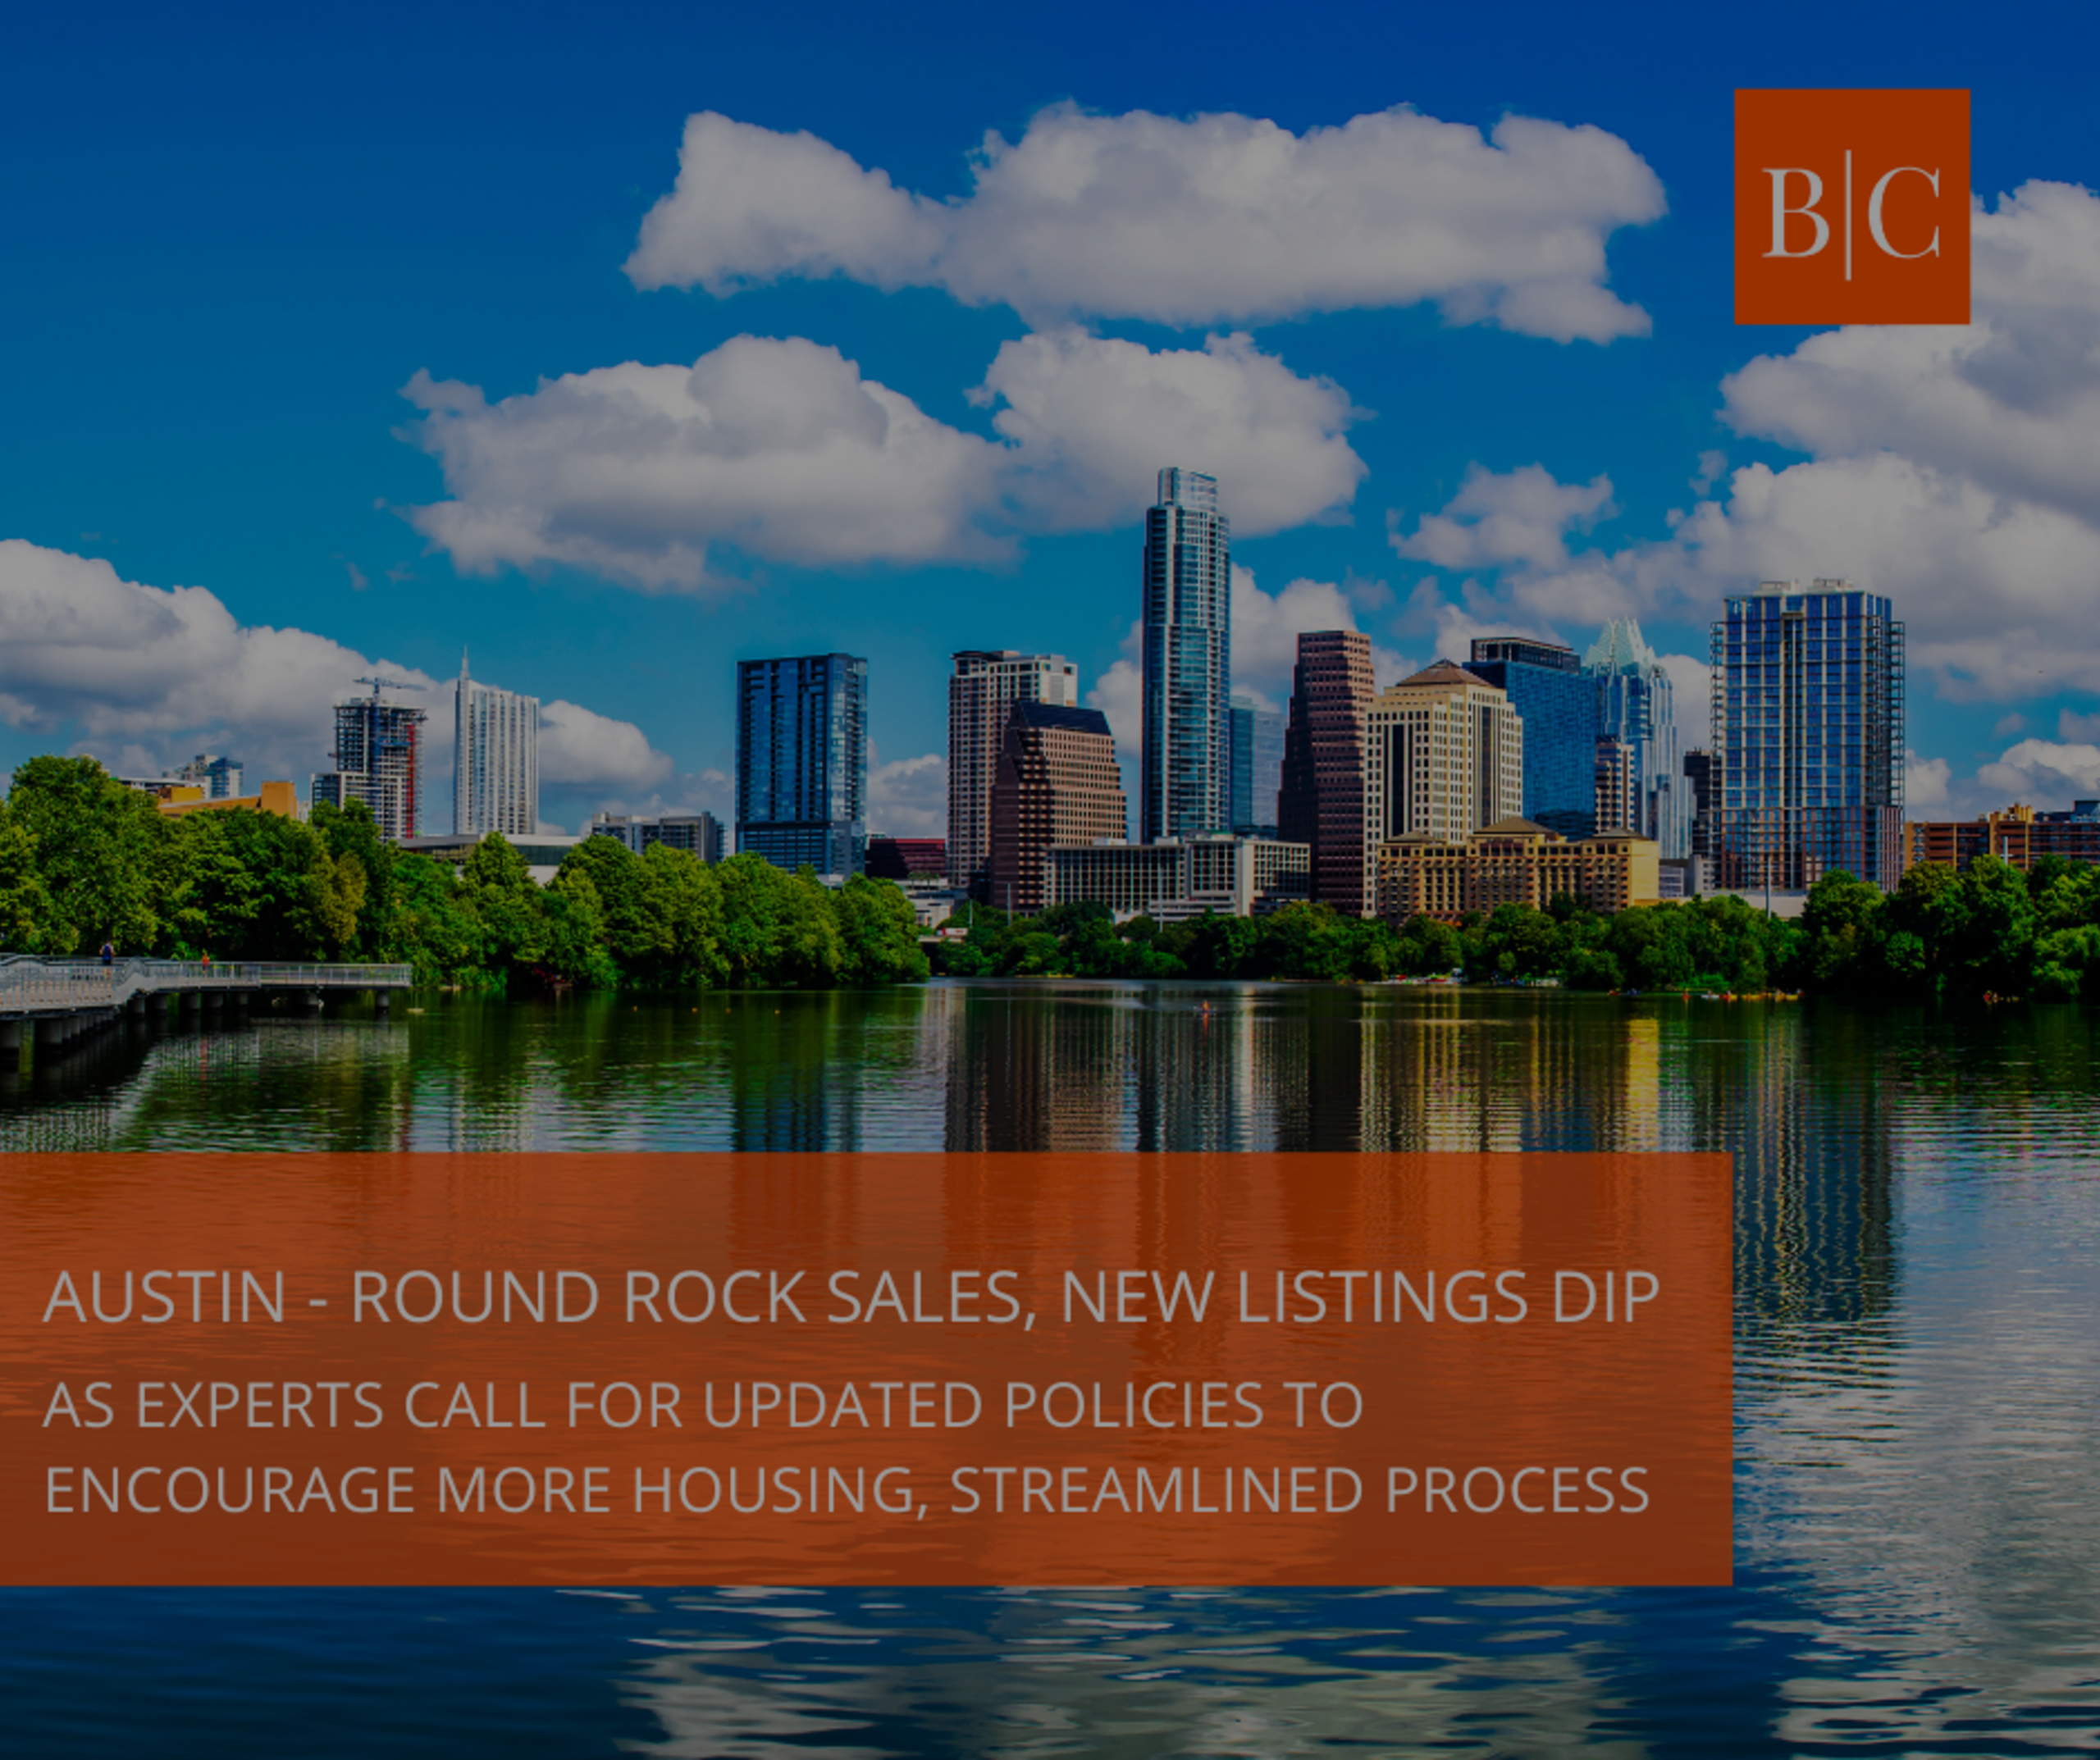 Austin-Round Rock MSA sales, new listings dip as experts call for updated policies to encourage more housing, streamlined process